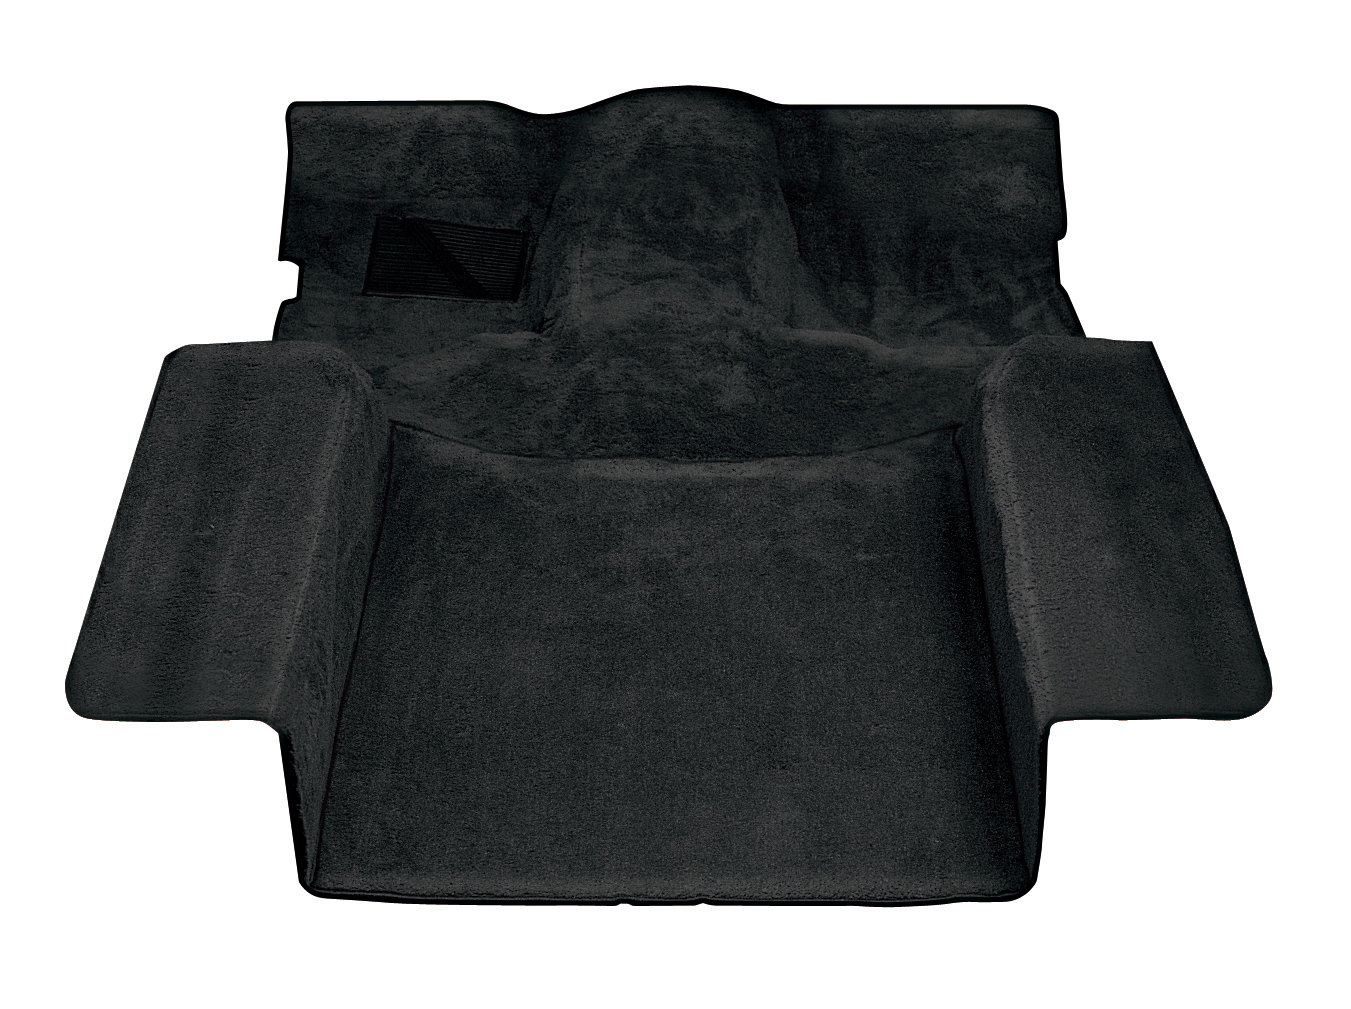 8078-Dark Grey Plush Cut Pile With Crossmember Passenger Area Only 1997 to 2002 Jeep Cherokee Carpet Custom Molded Replacement Kit